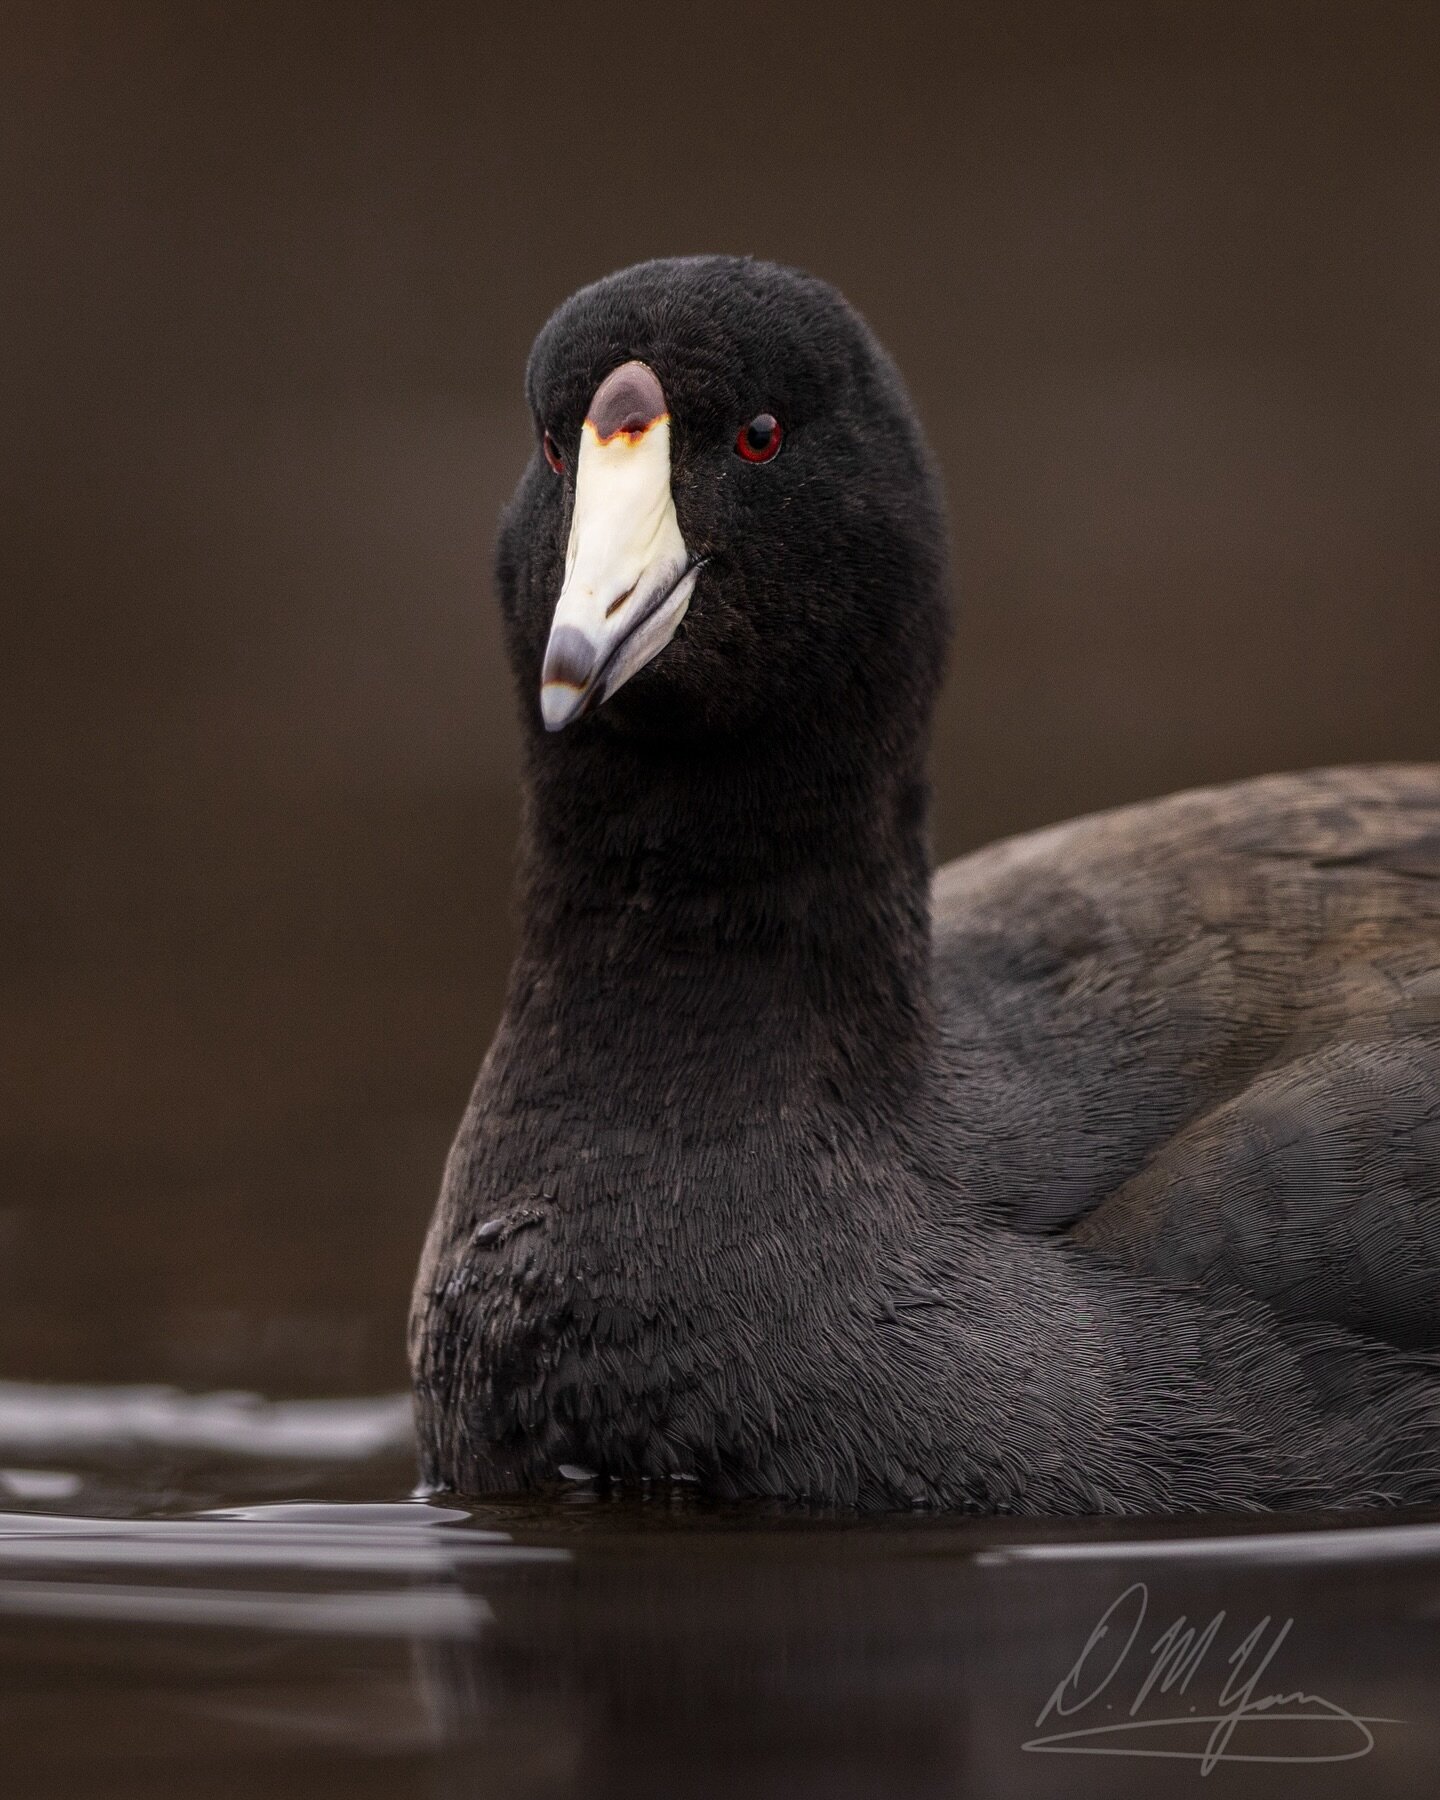 American Coot from last weekend. Don&rsquo;t these guys look like sock puppets?
_____
#americancoot #coot #birds #wildbirds #bestbirdshots #birdlovers #birding #birdphotography #birdingphotography #birder #birdsofinstagram #birdwatching #feather_perf